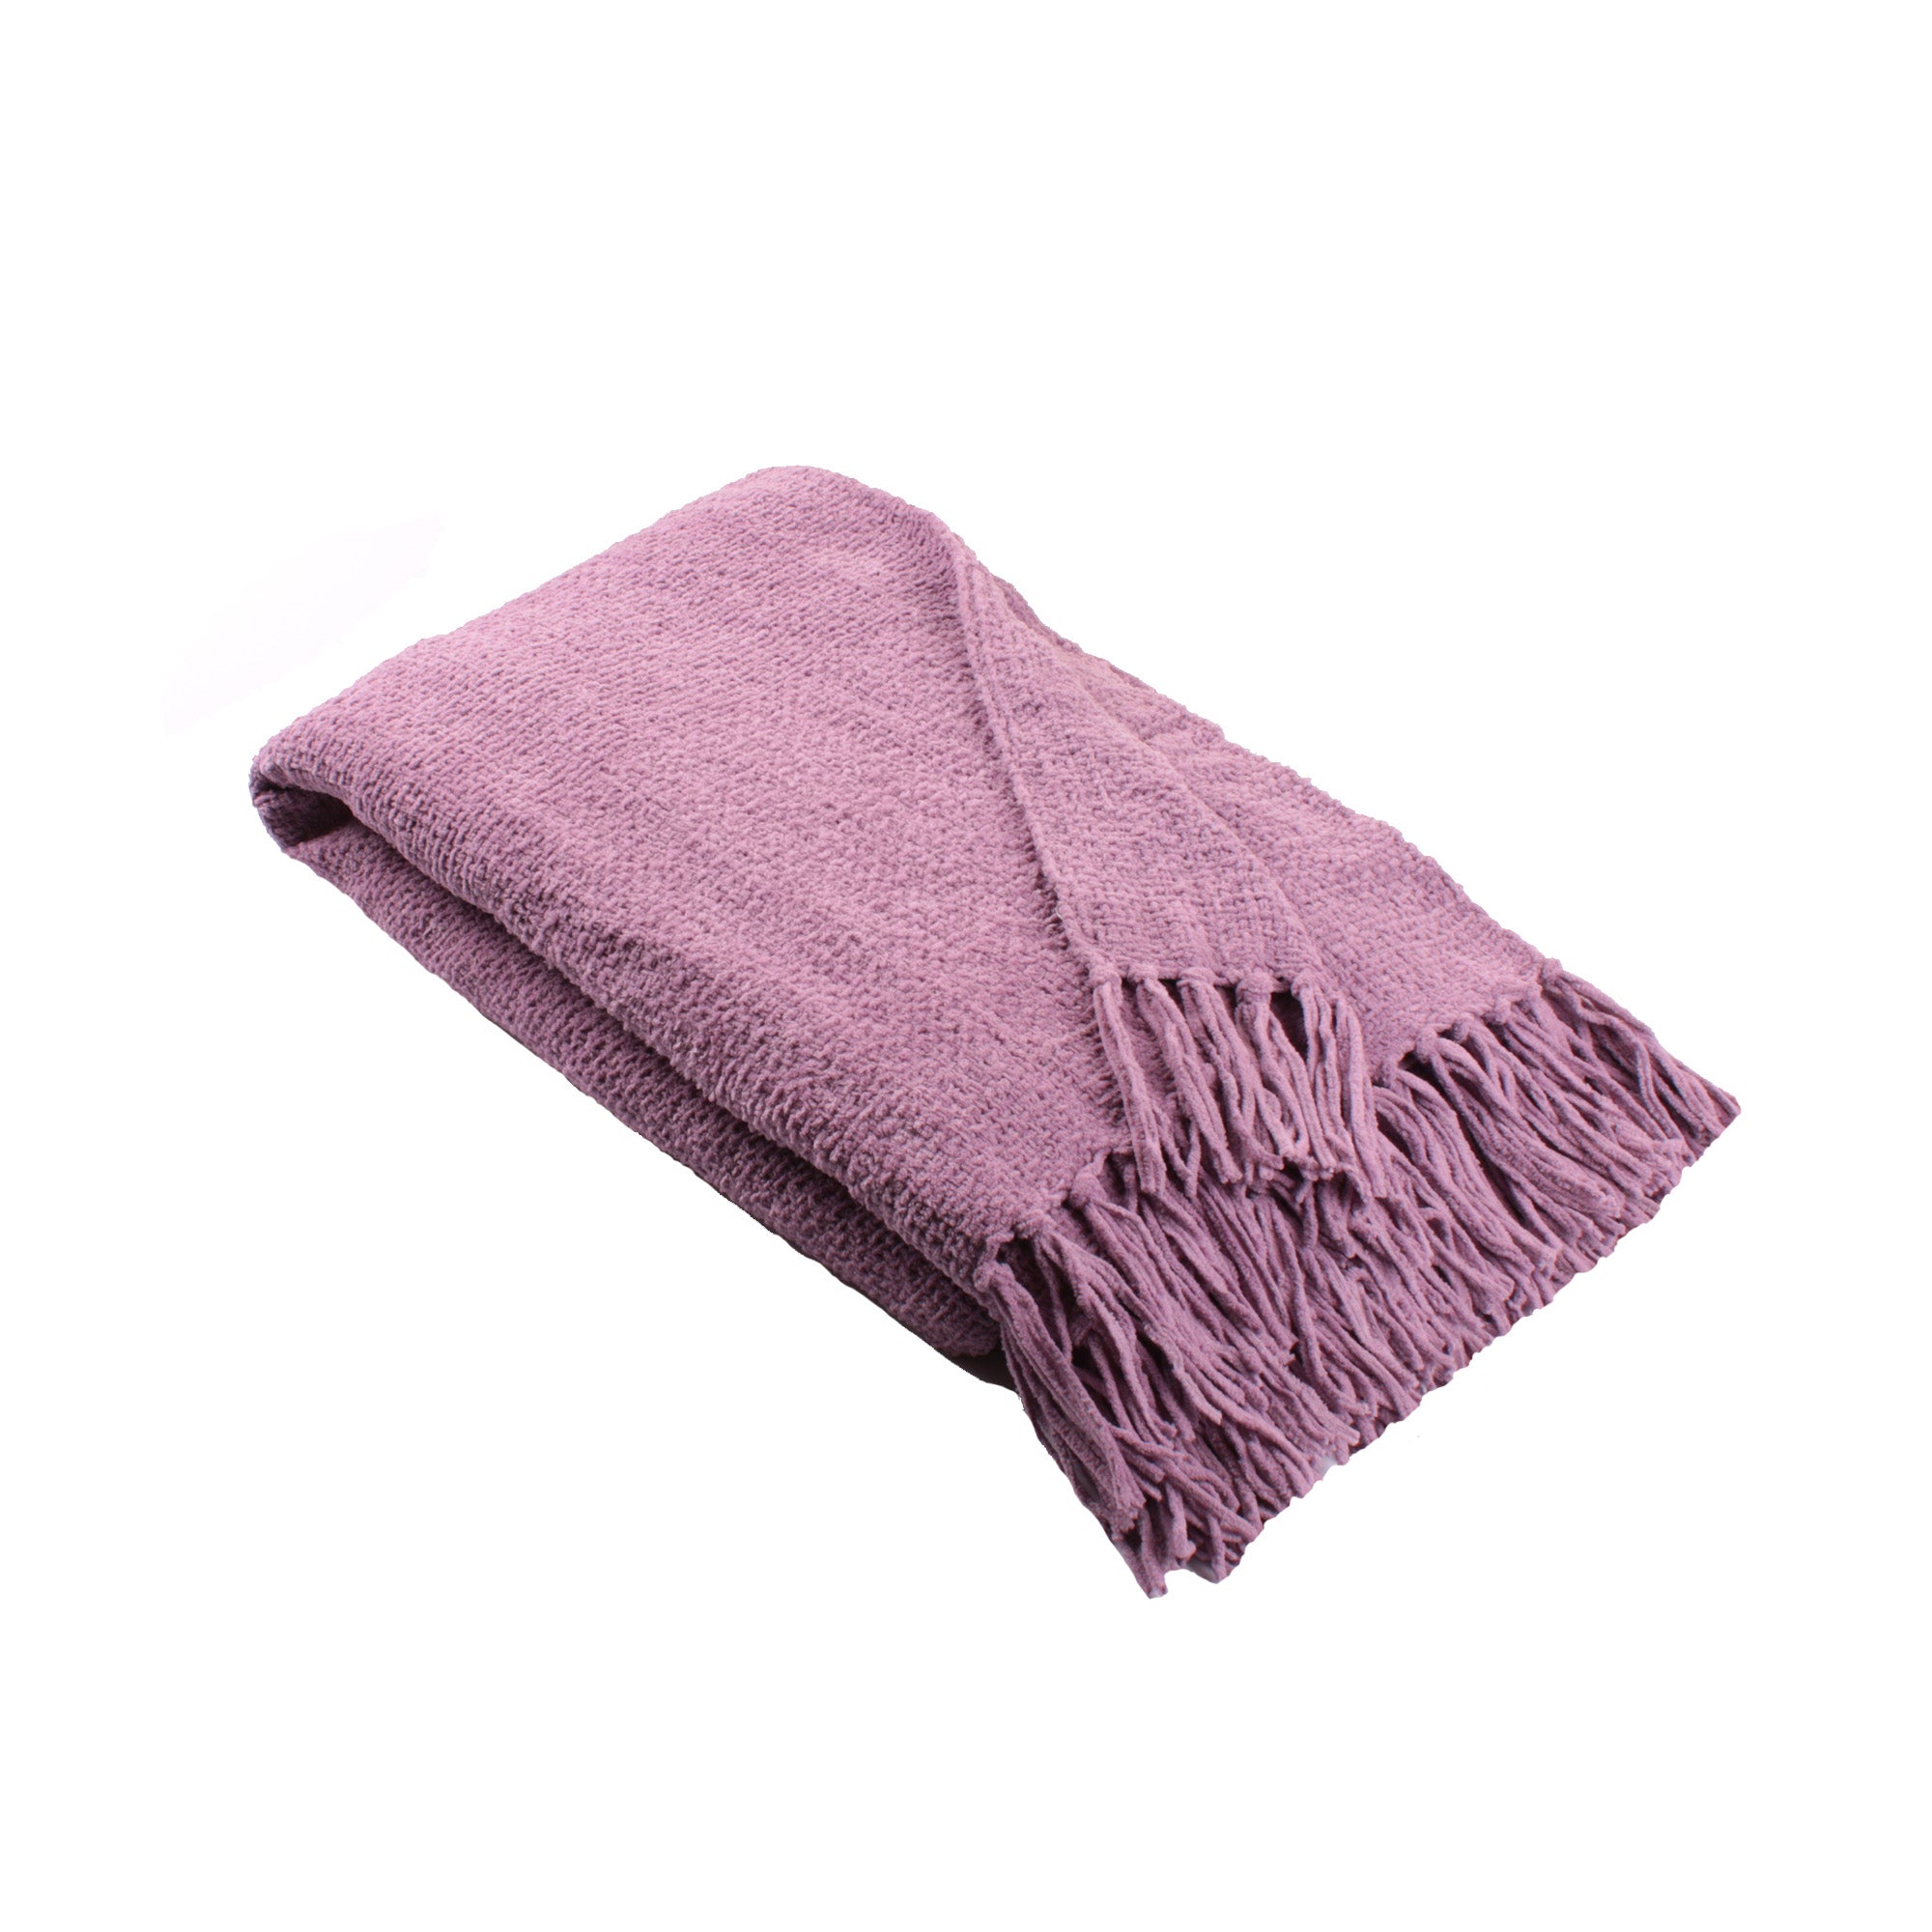 Throw Chenille by Appletree Loft in Heather